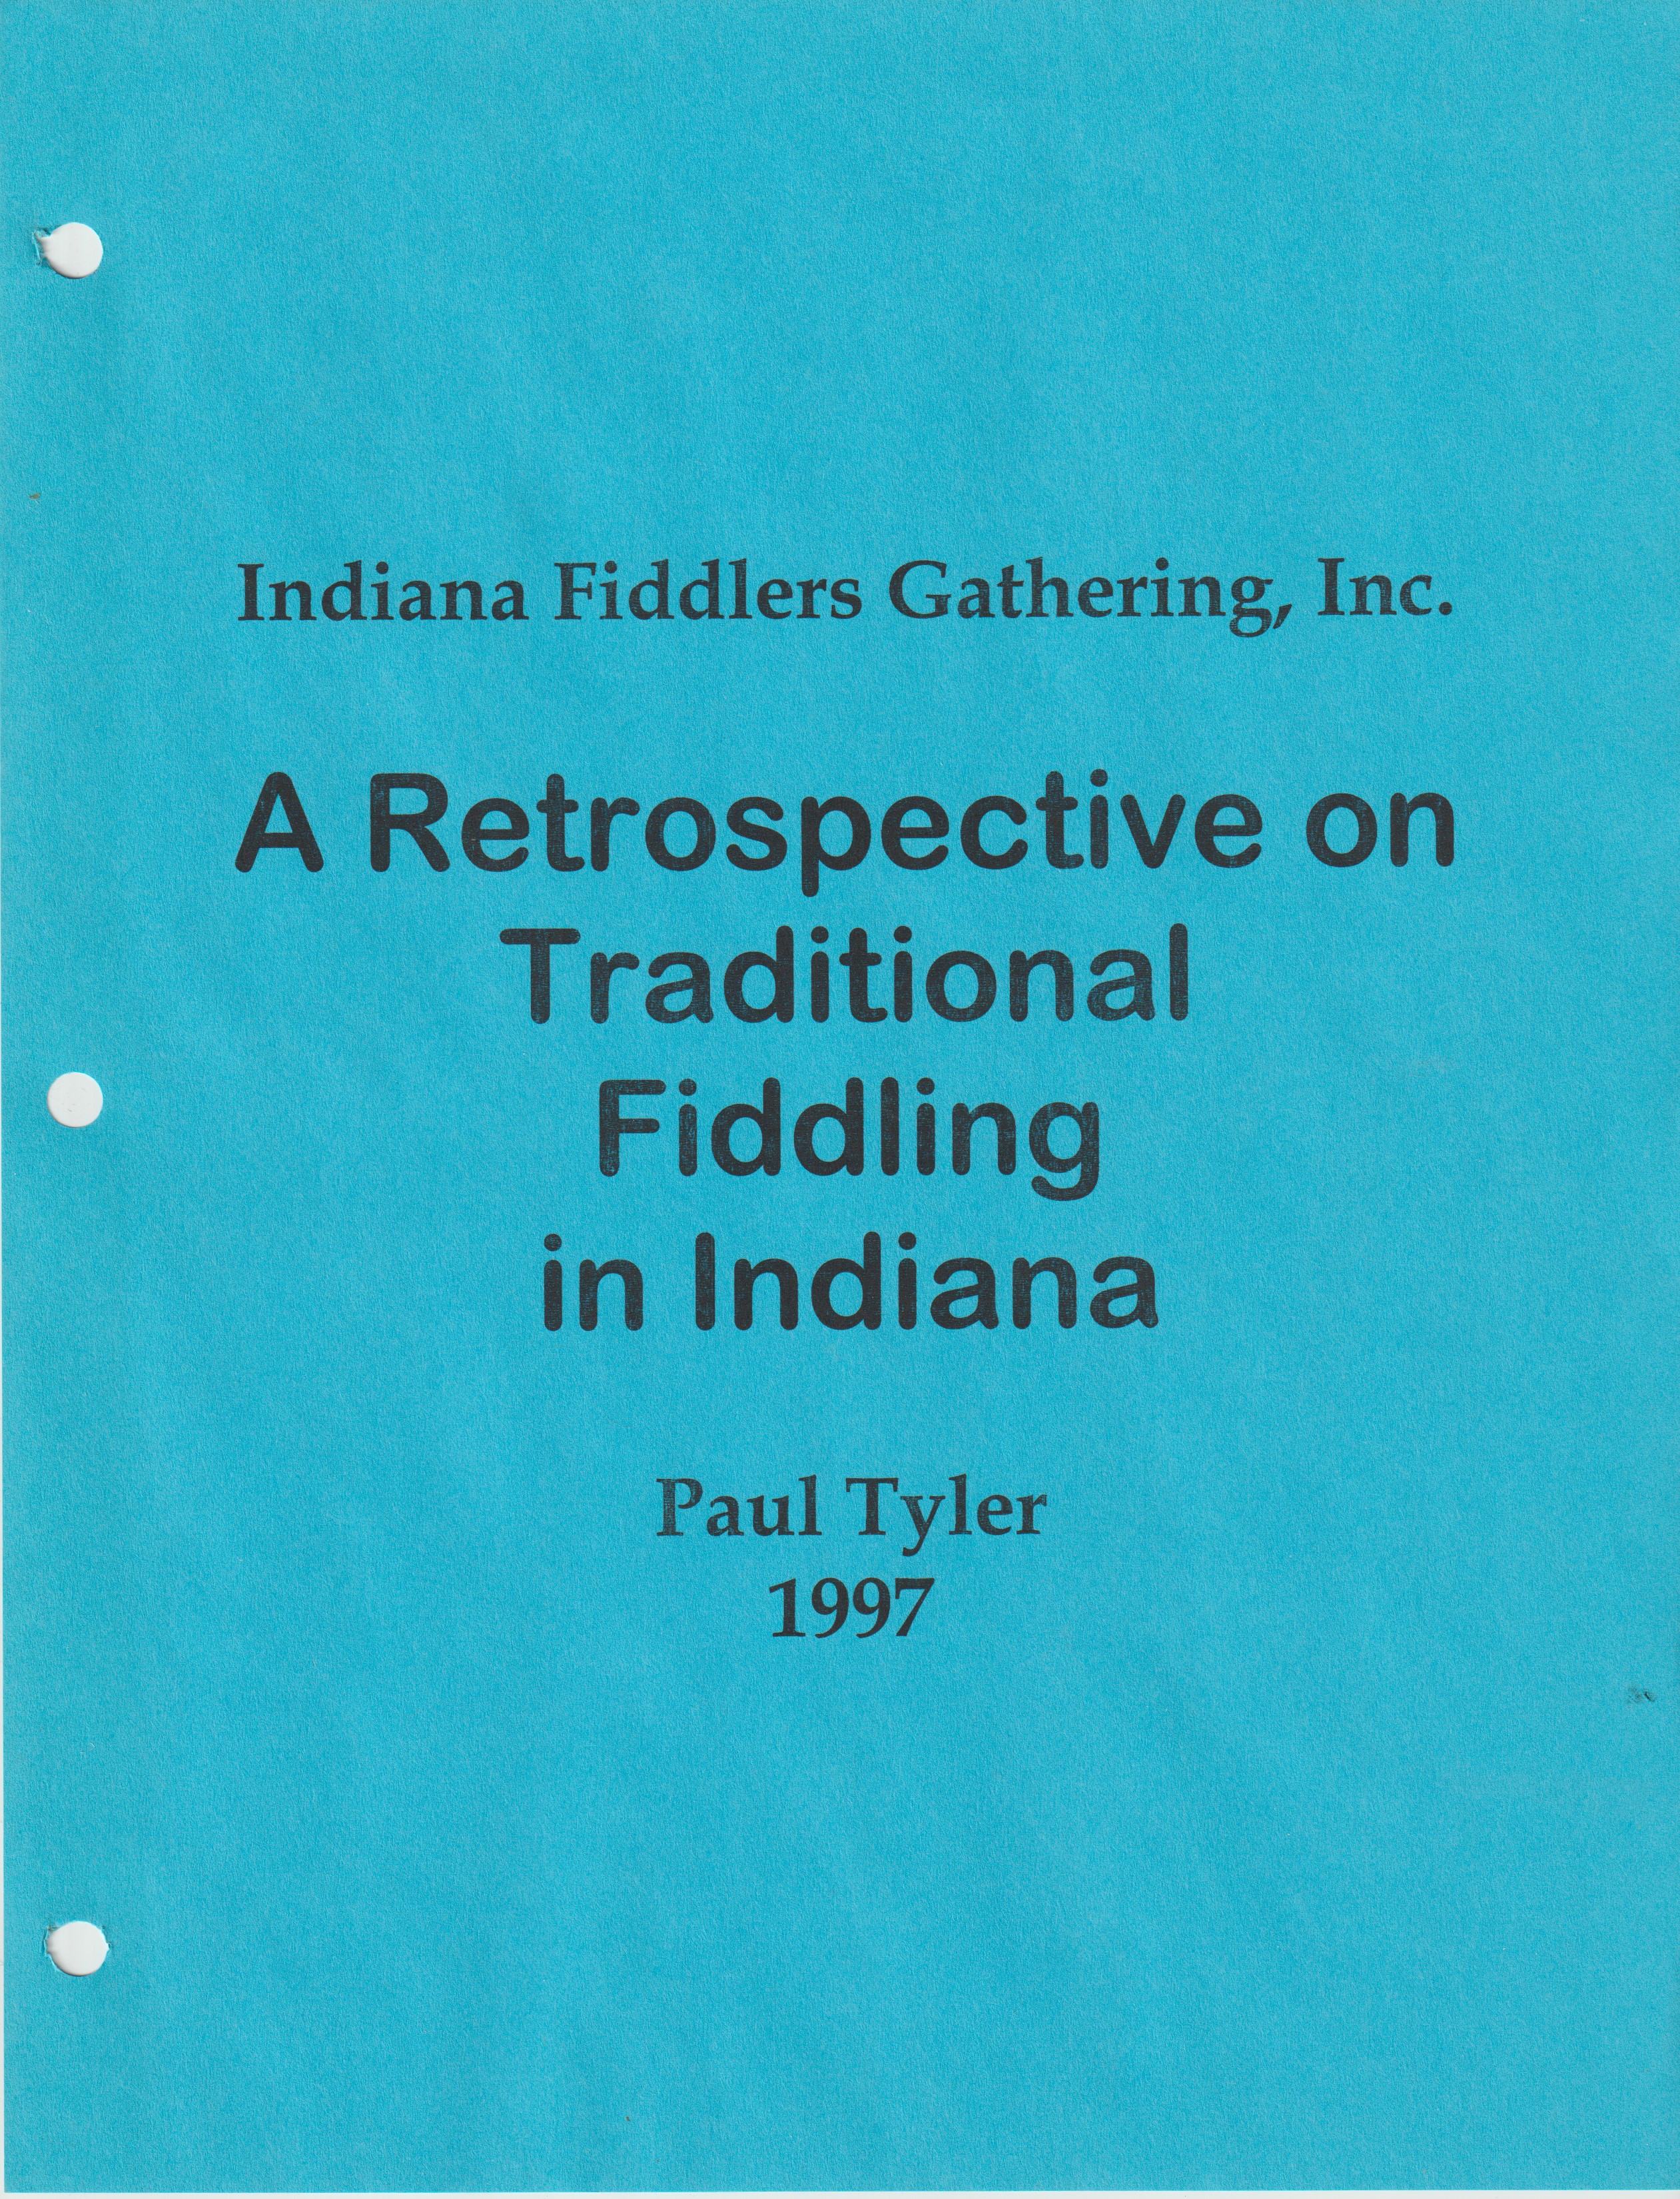 A
            Retrospective on Traditional Fiddling in Indiana